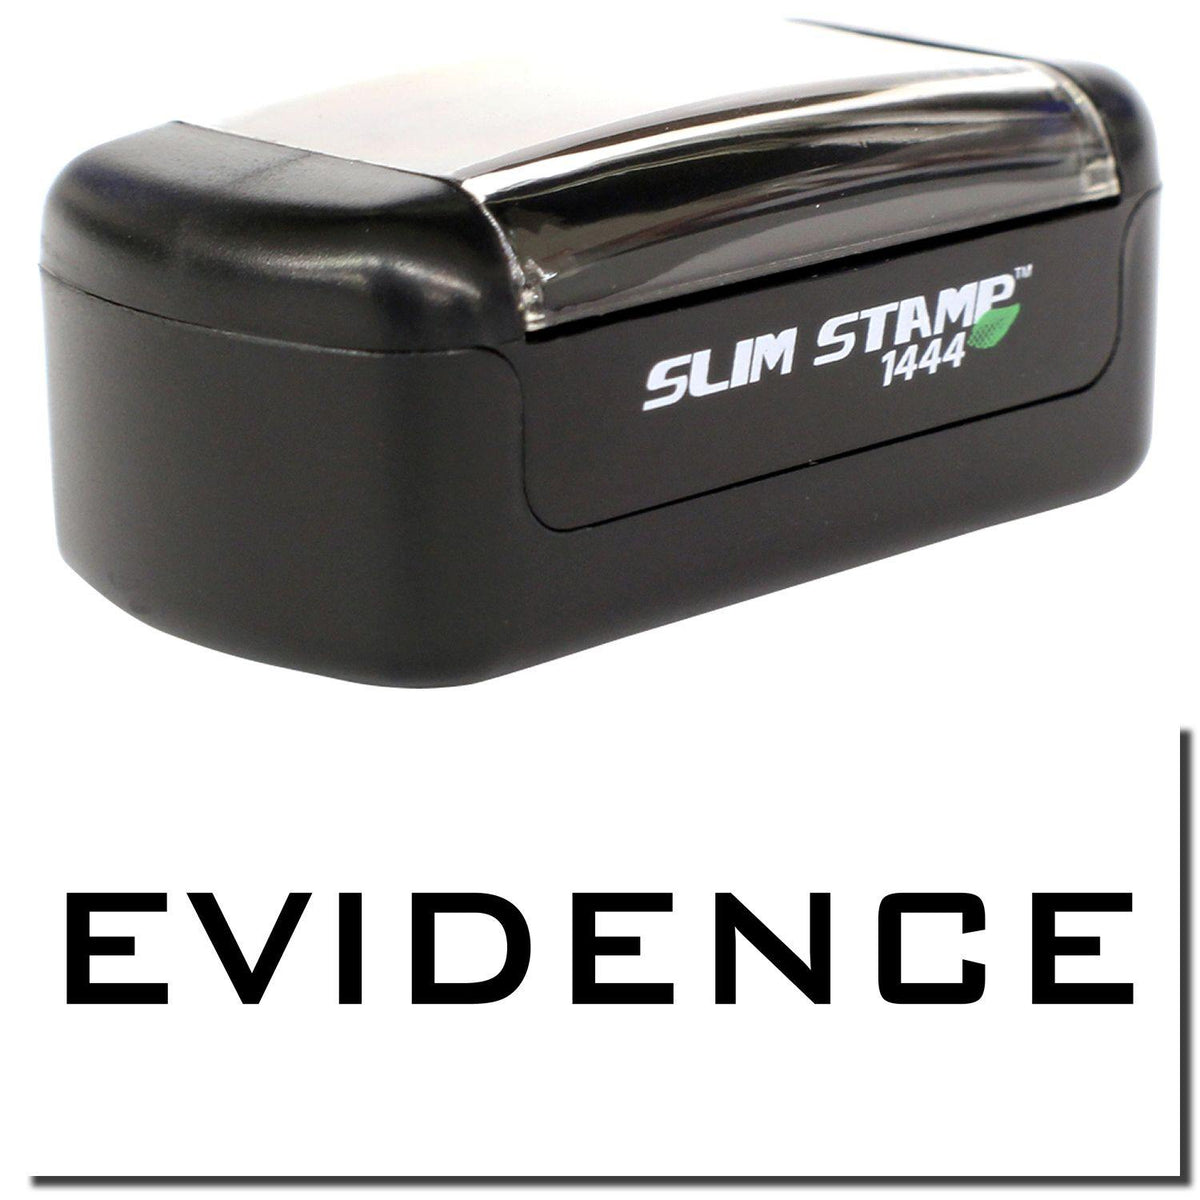 A stock office pre-inked stamp with a stamped image showing how the text &quot;EVIDENCE&quot; is displayed after stamping.